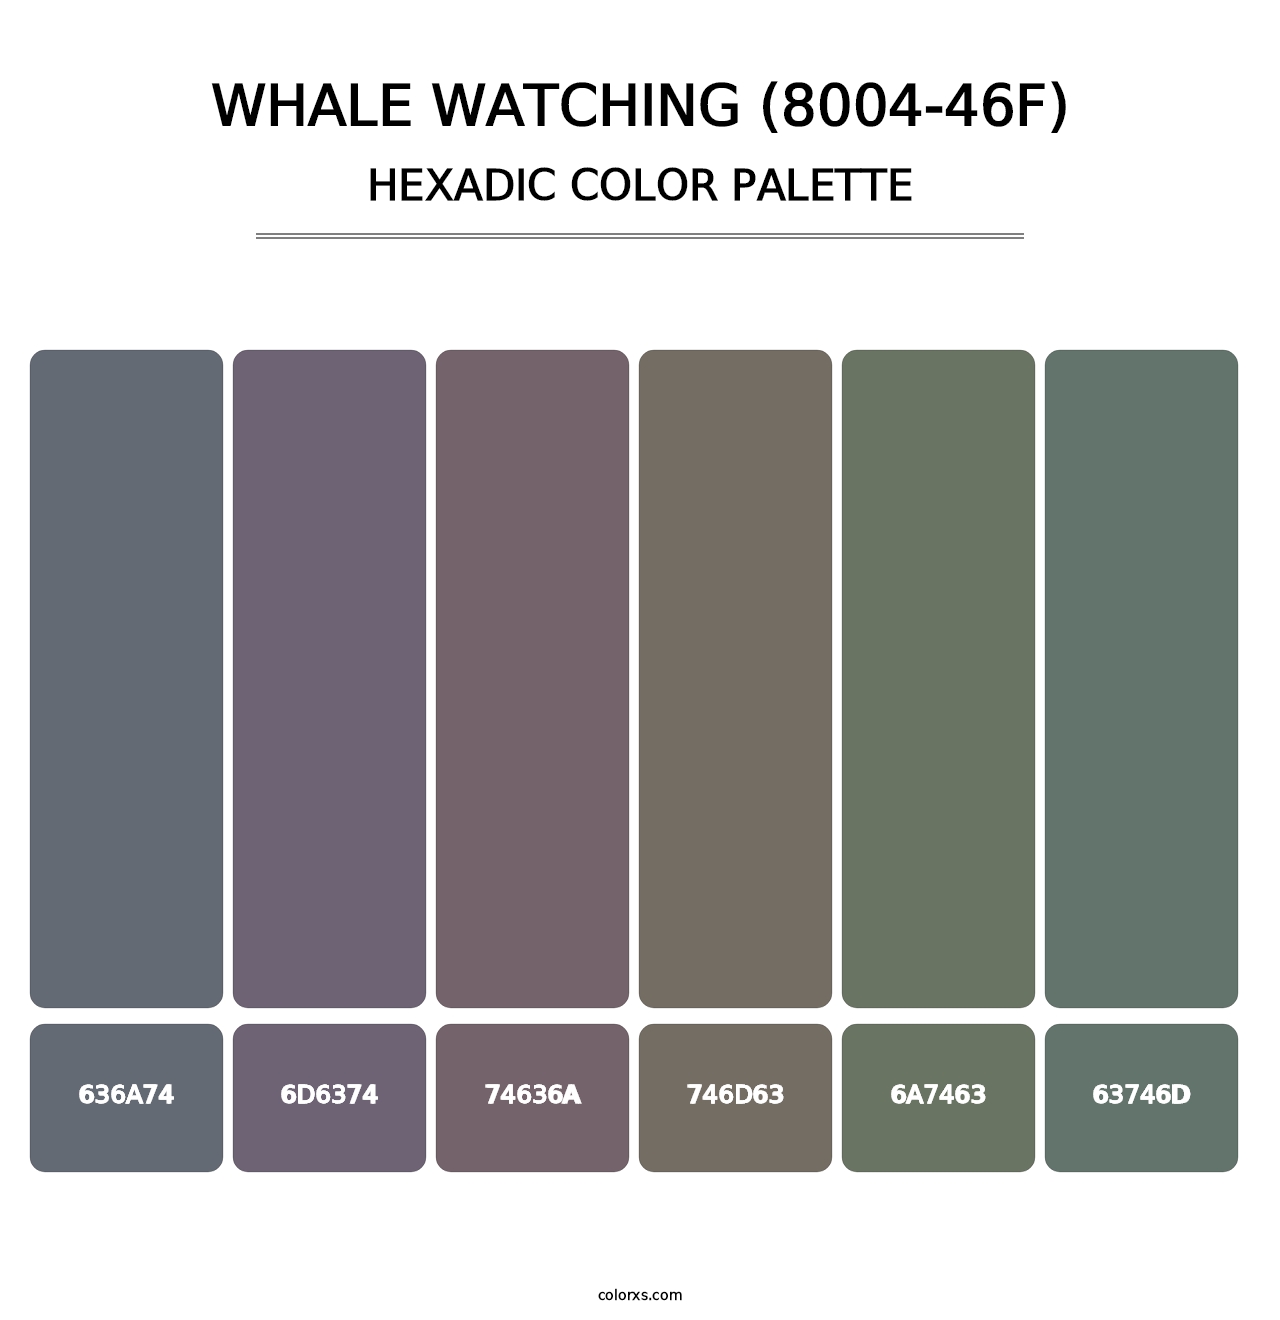 Whale Watching (8004-46F) - Hexadic Color Palette